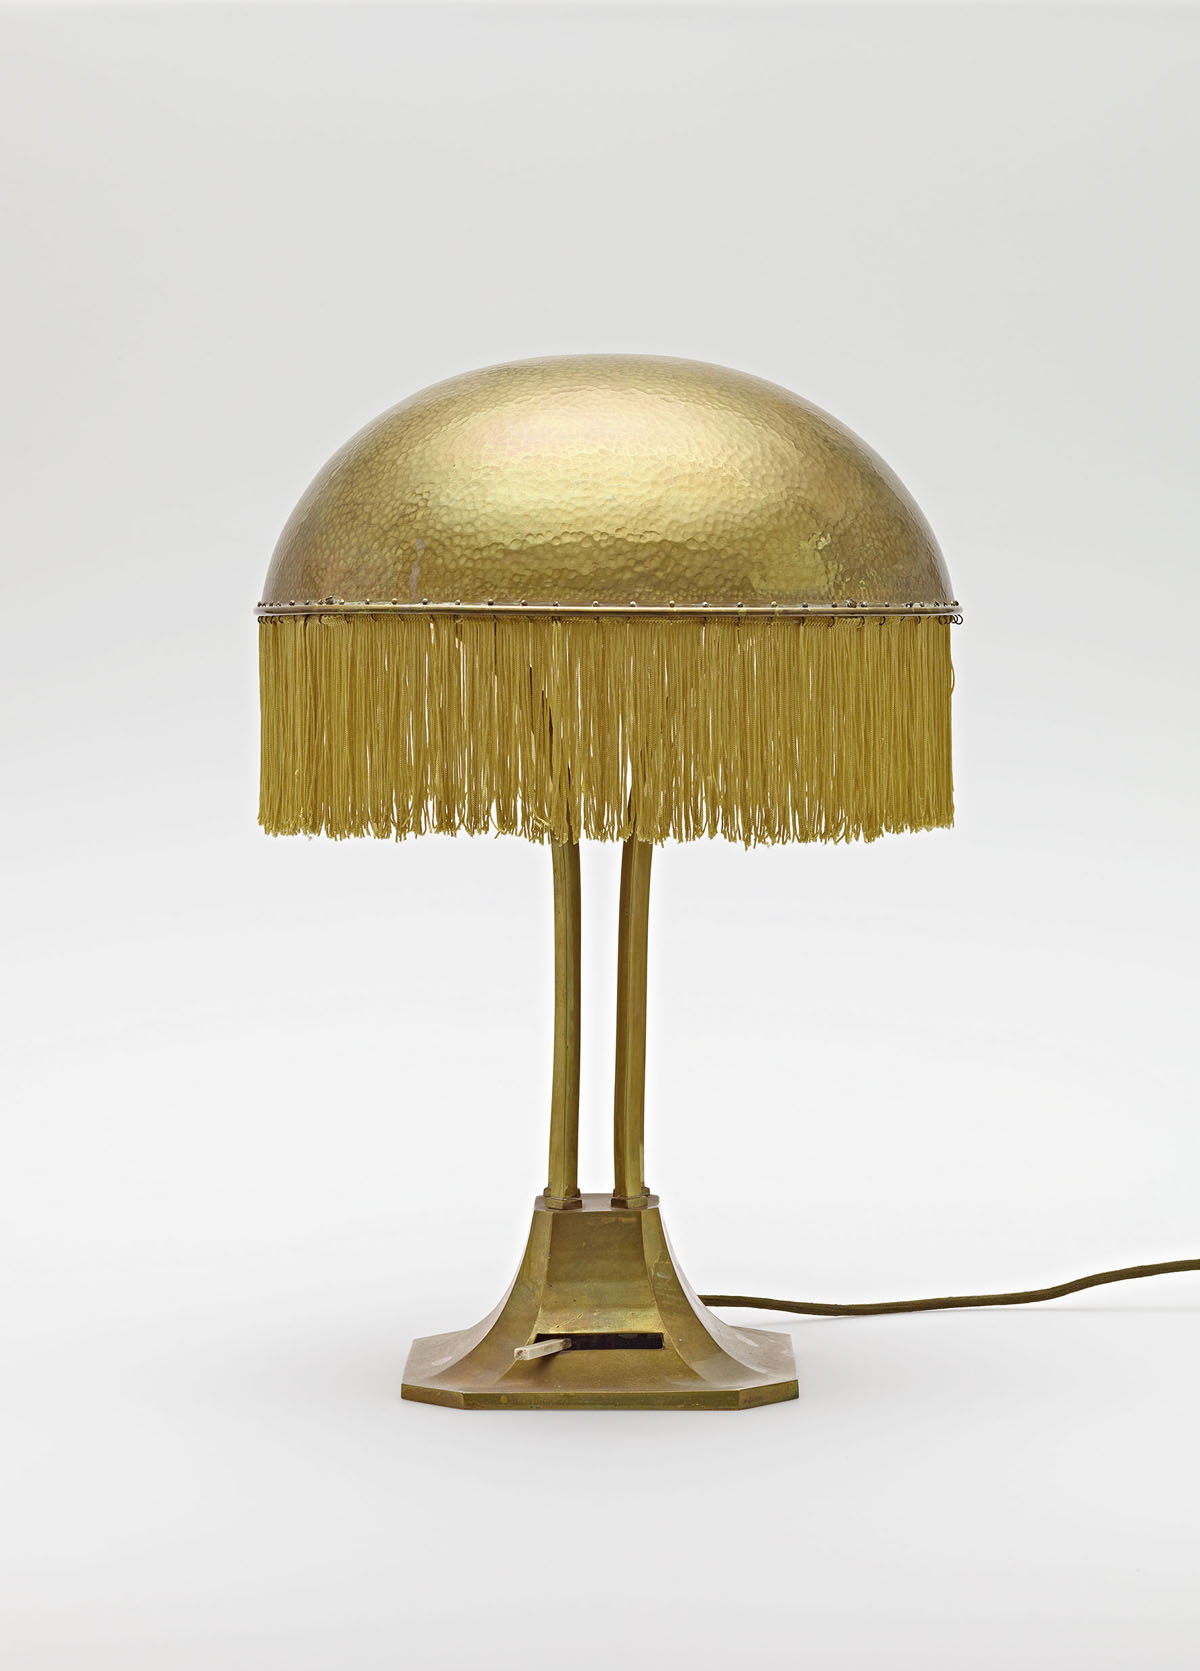 Adolf Loos, Table lamp from the Turnowsky residence, ca. 1900, Hummel collection, Vienna © MAK/Georg Mayer